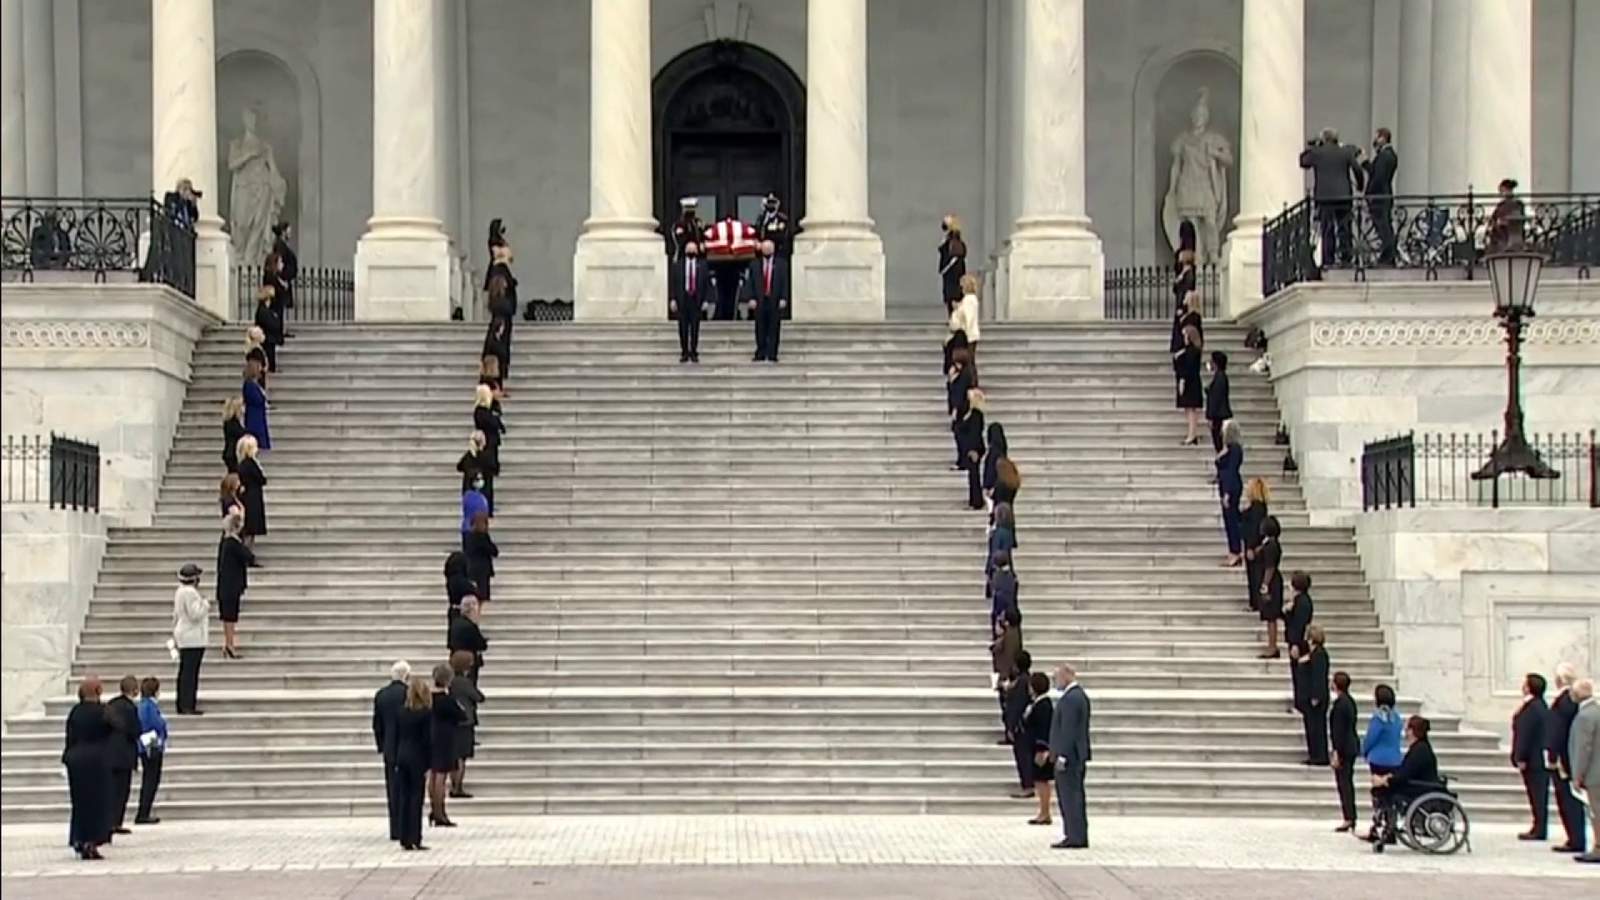 Private Capitol ceremony final goodbye to Justice Ruth Bader Ginsburg